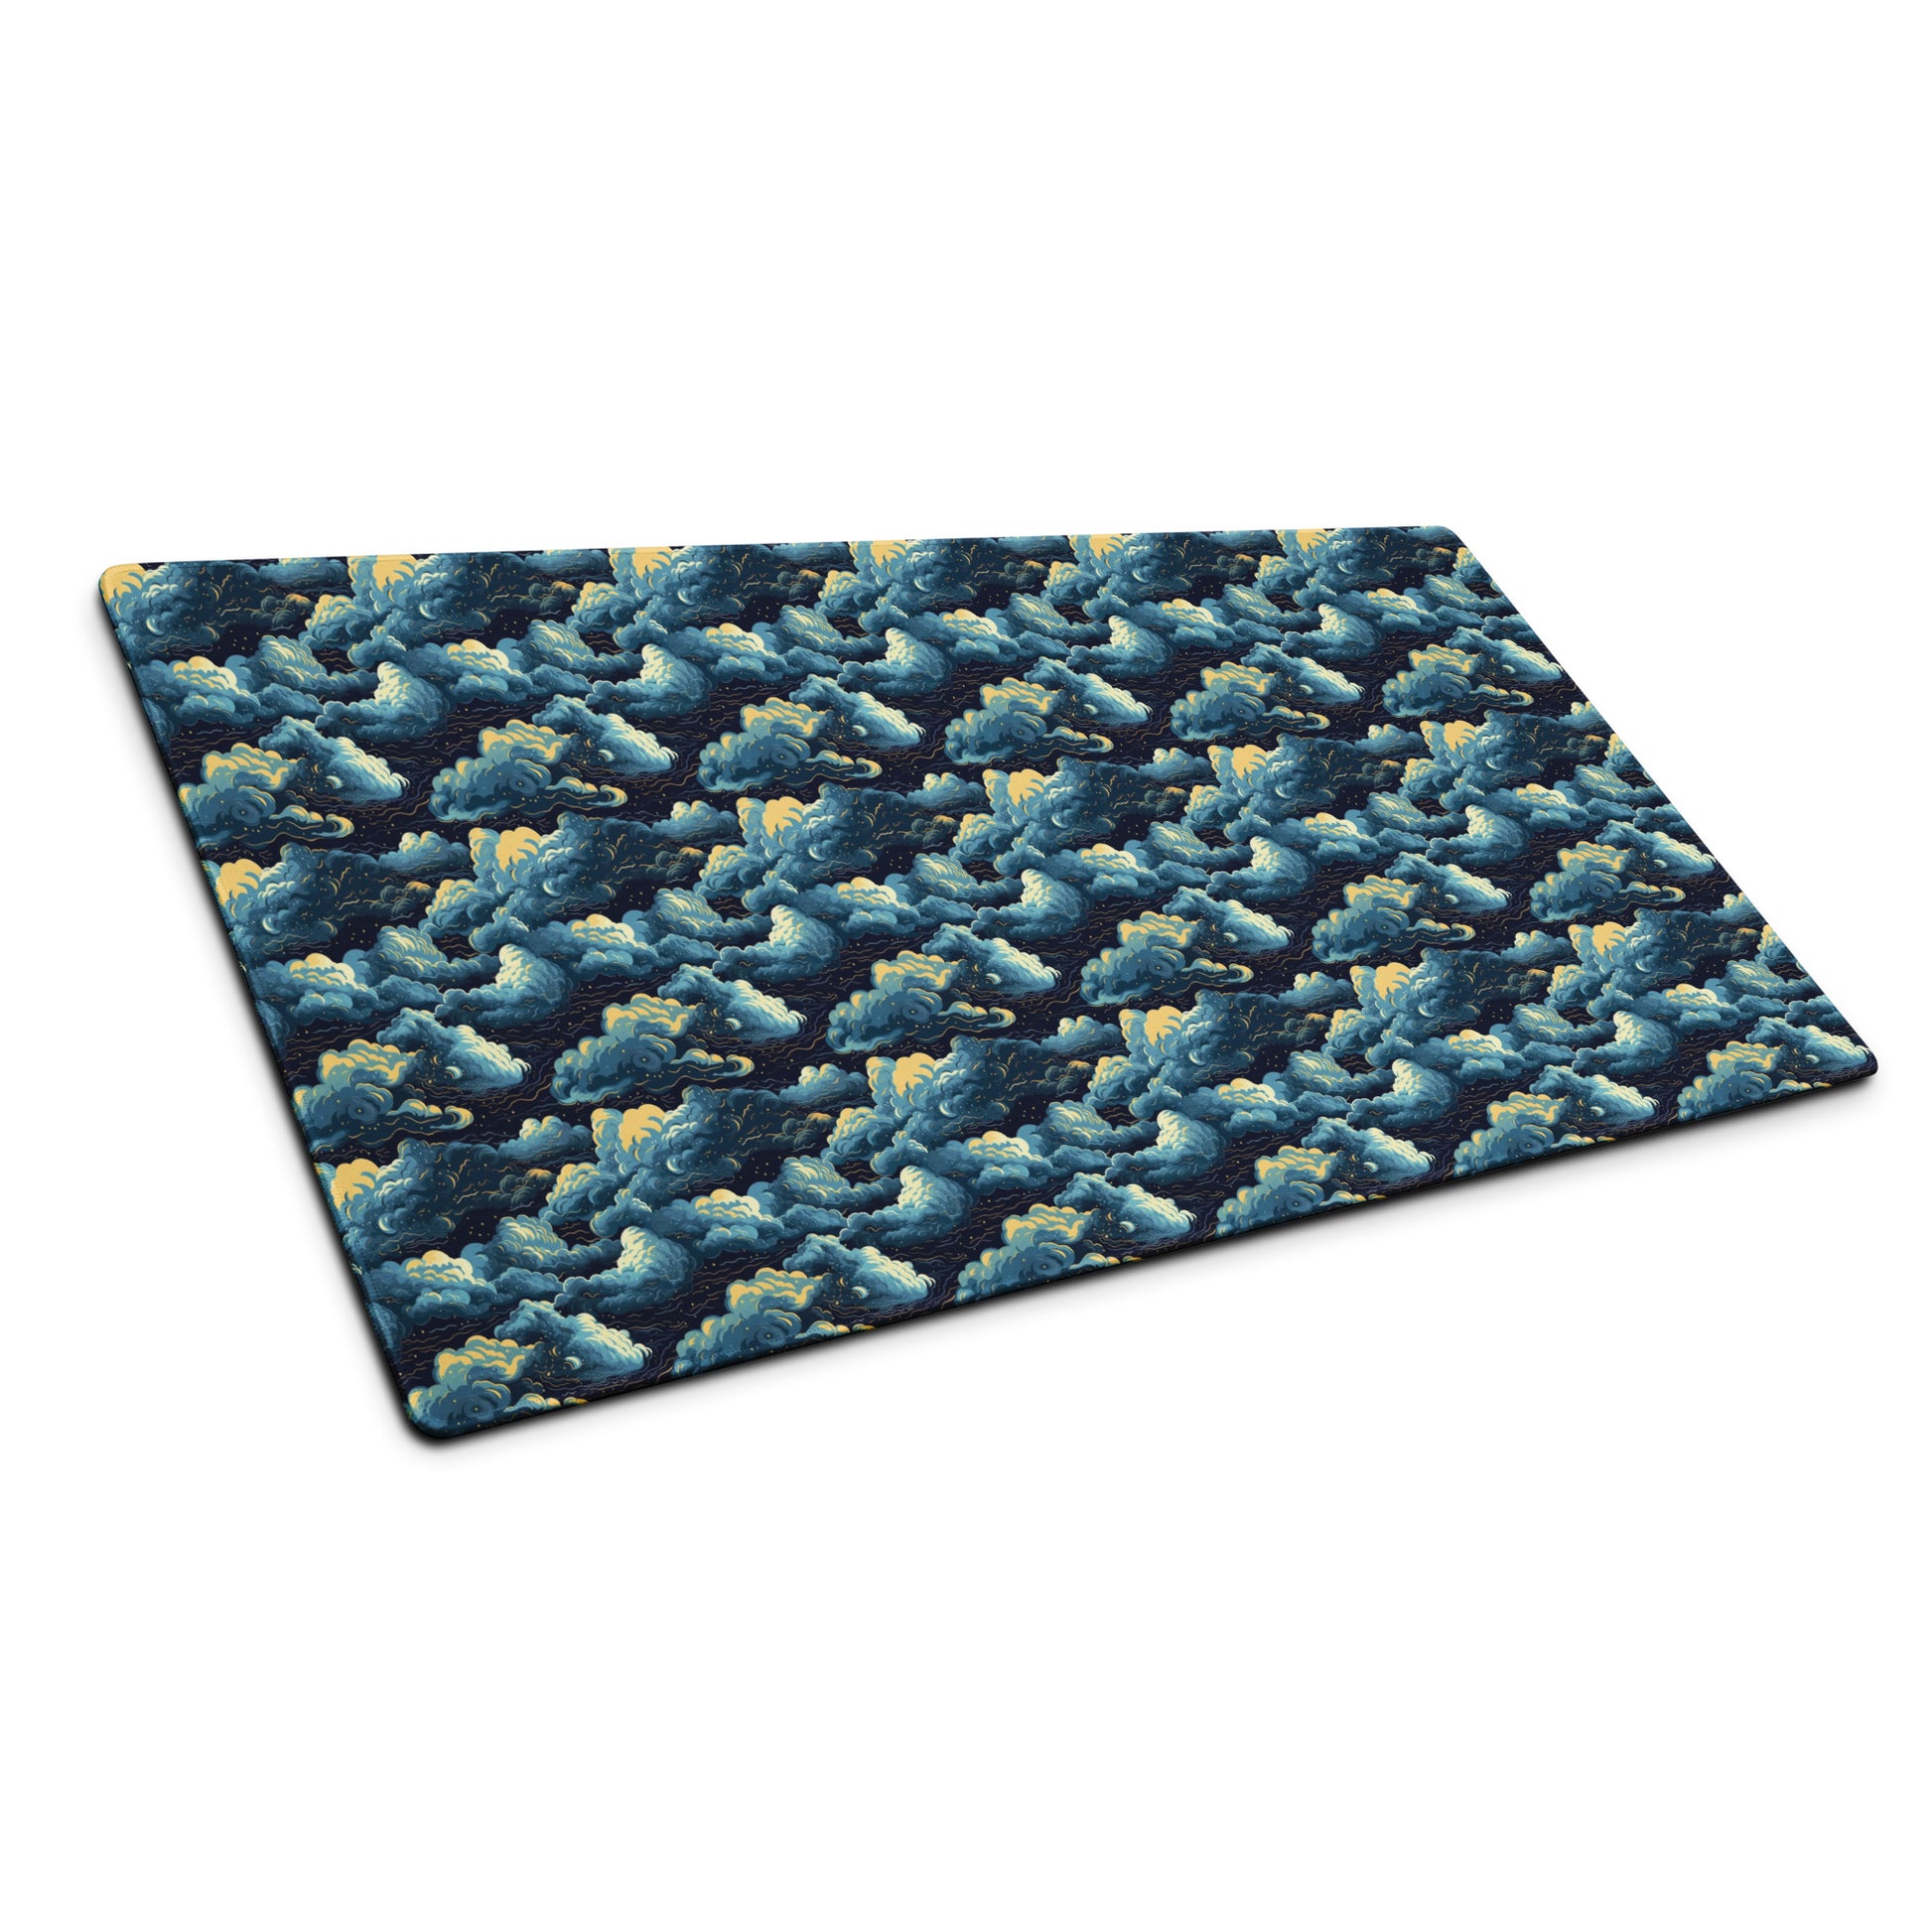 A 36" x 18" desk pad with a cloudy night sky pattern sitting at an angle.